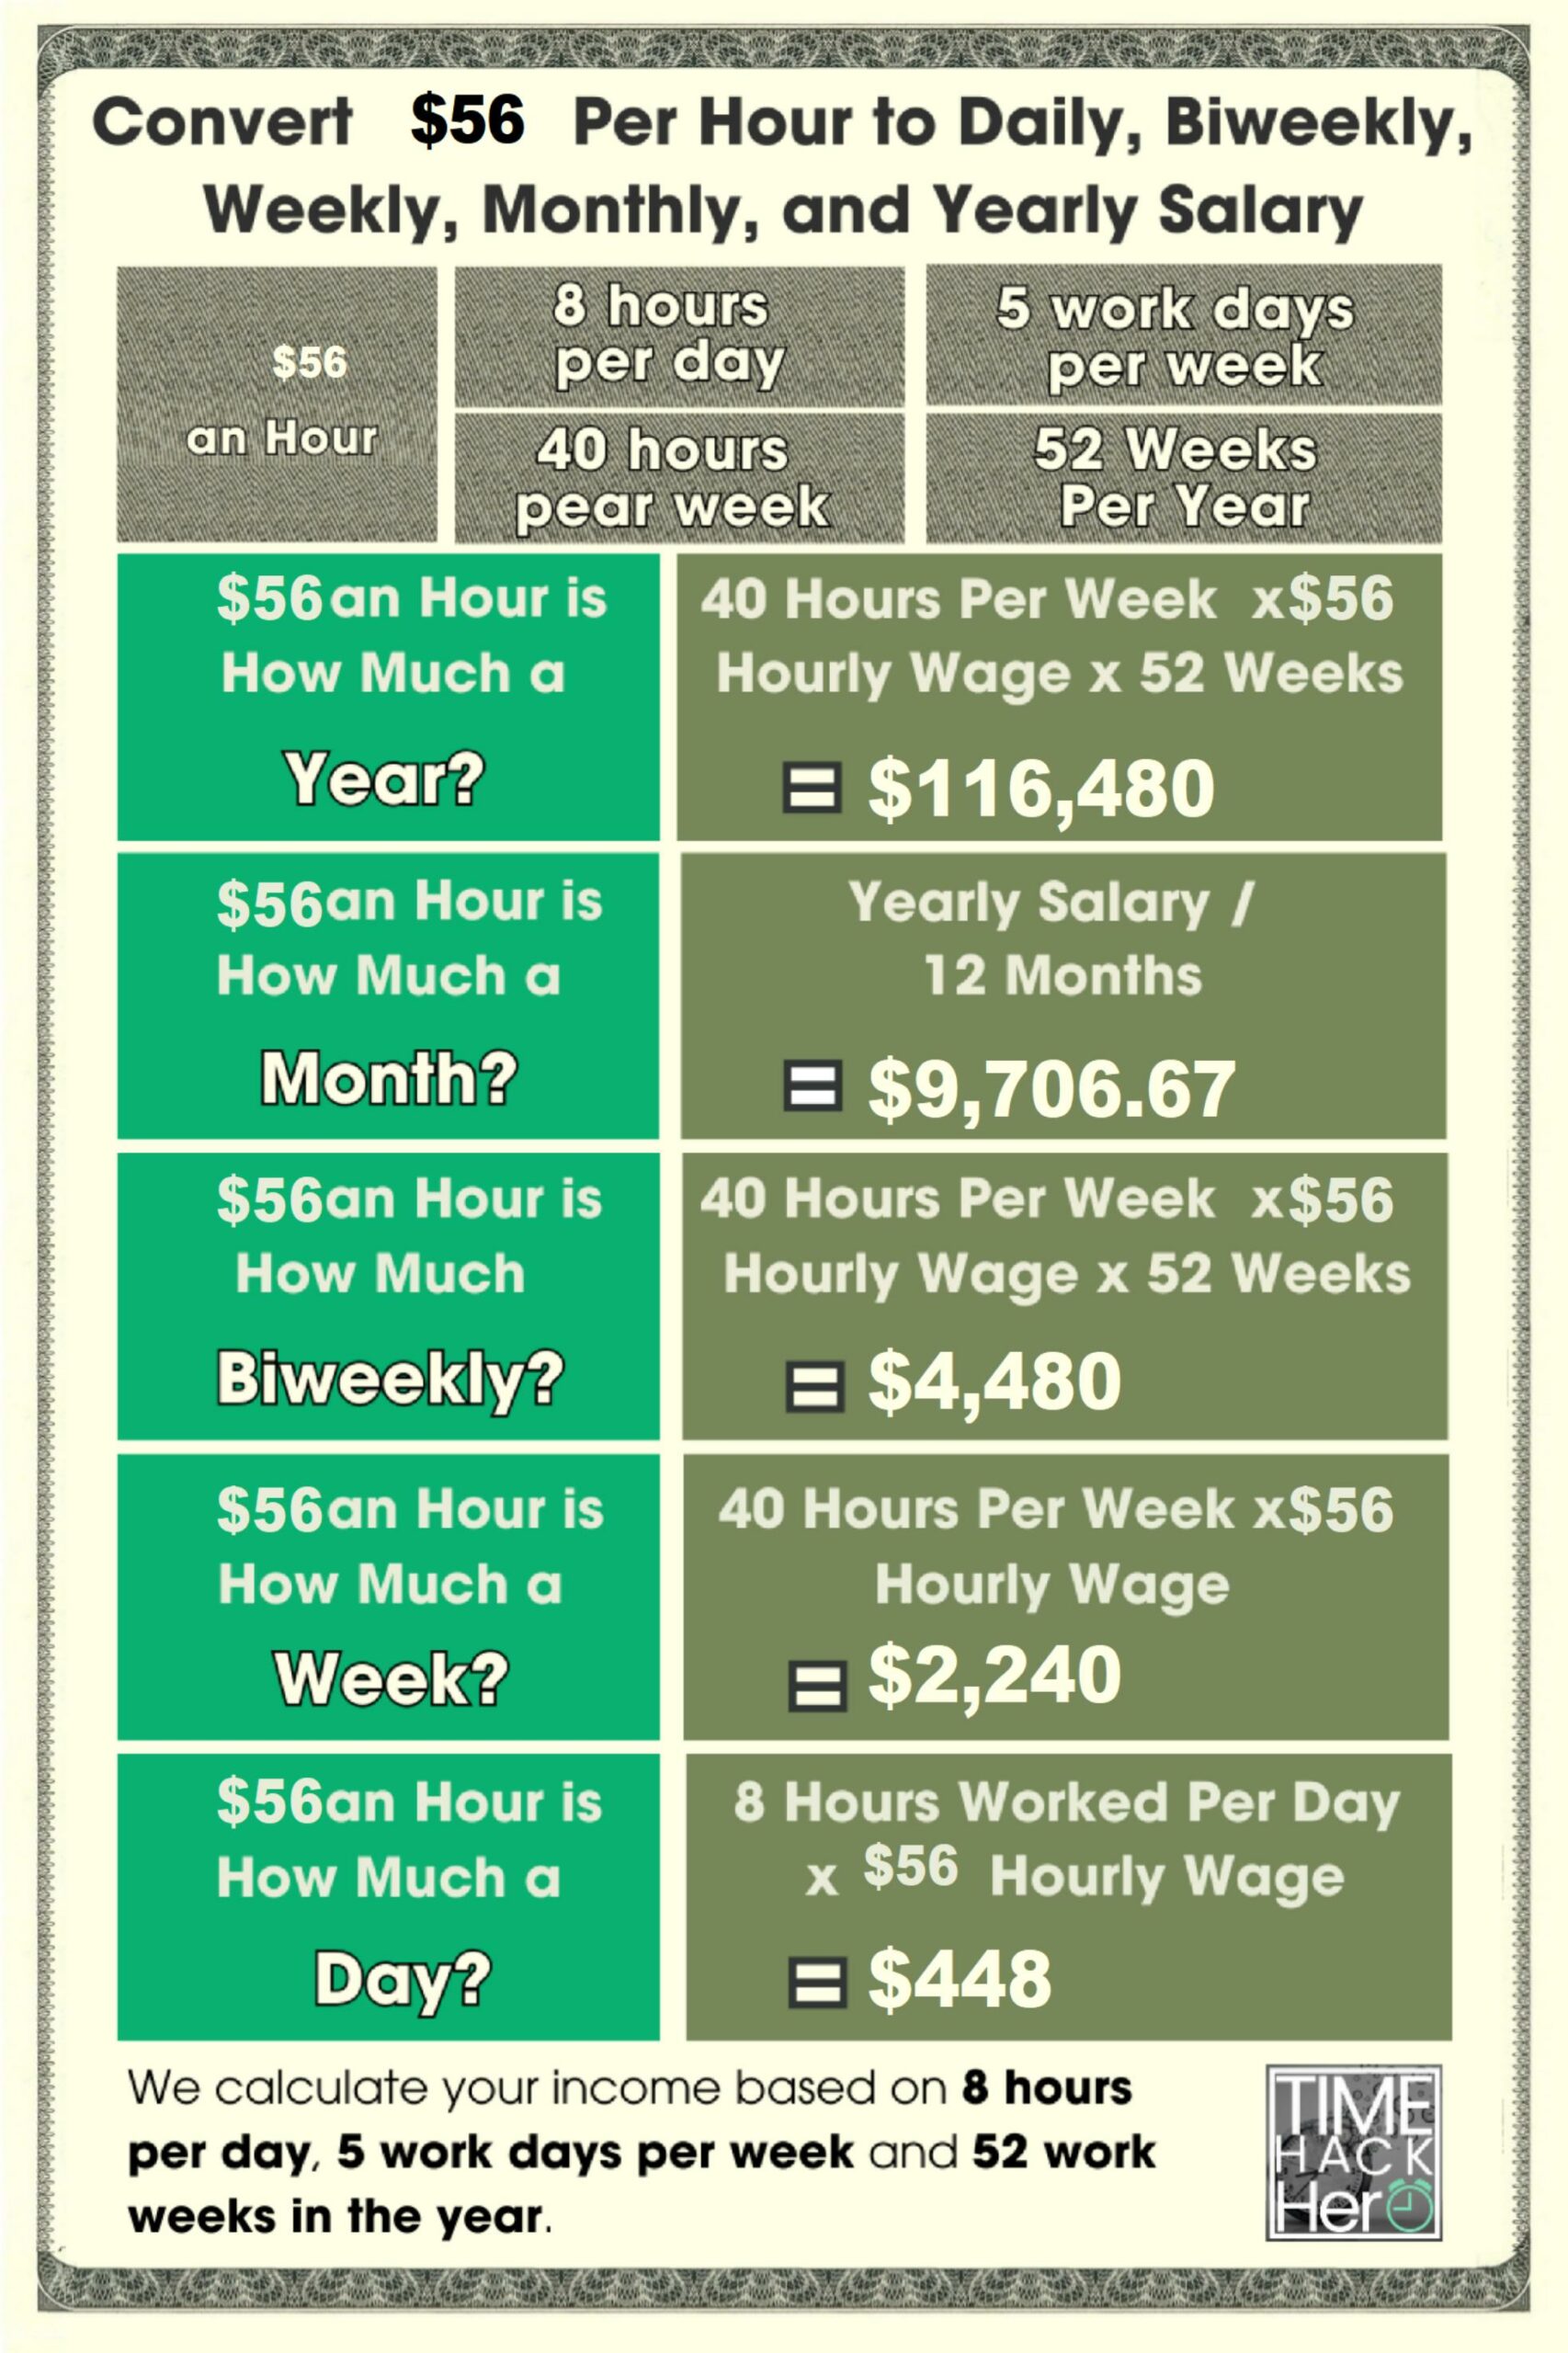 Convert $56 Per Hour to Weekly, Monthly, and Yearly Salary